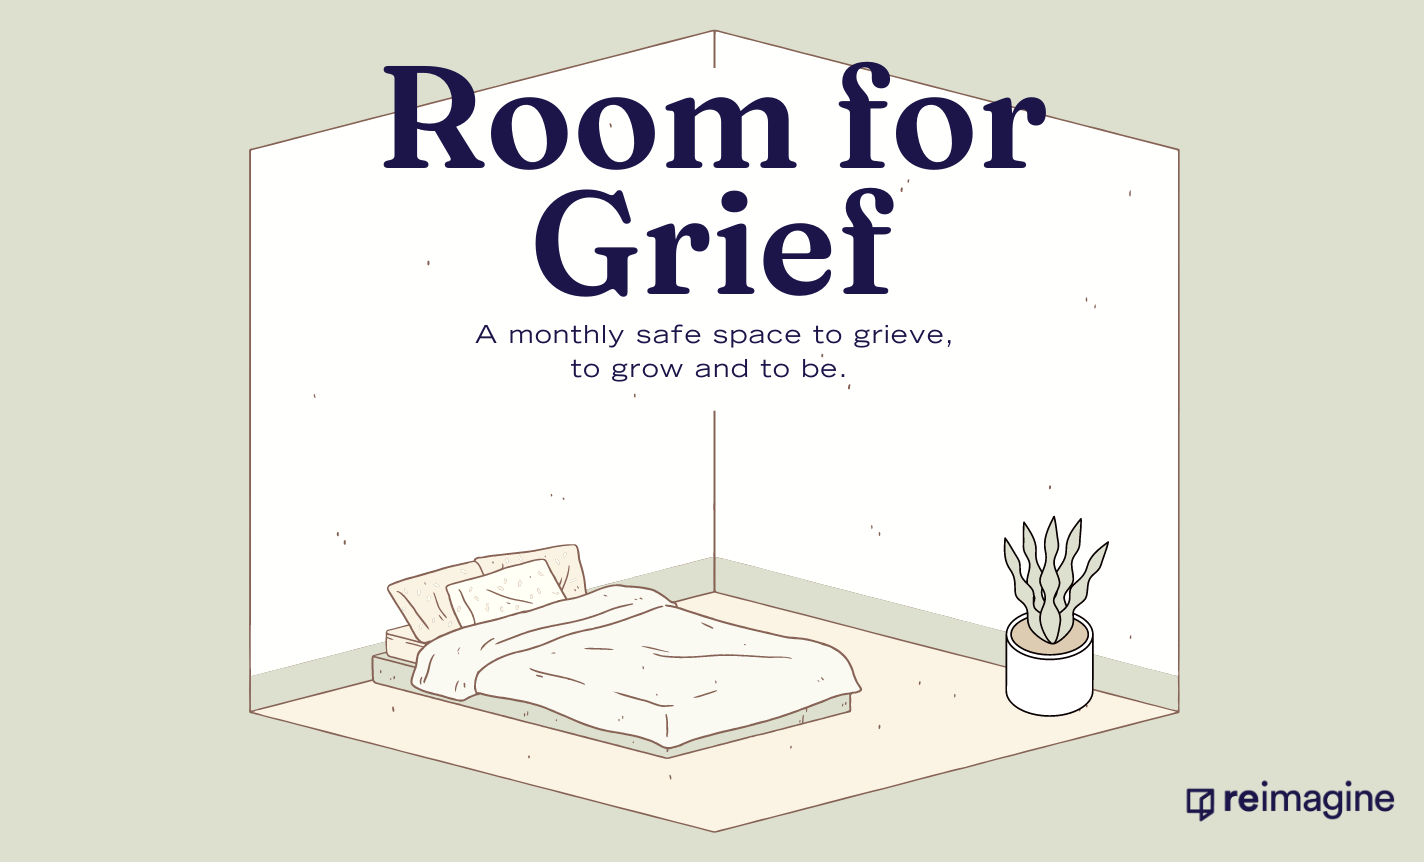 Room for Grief